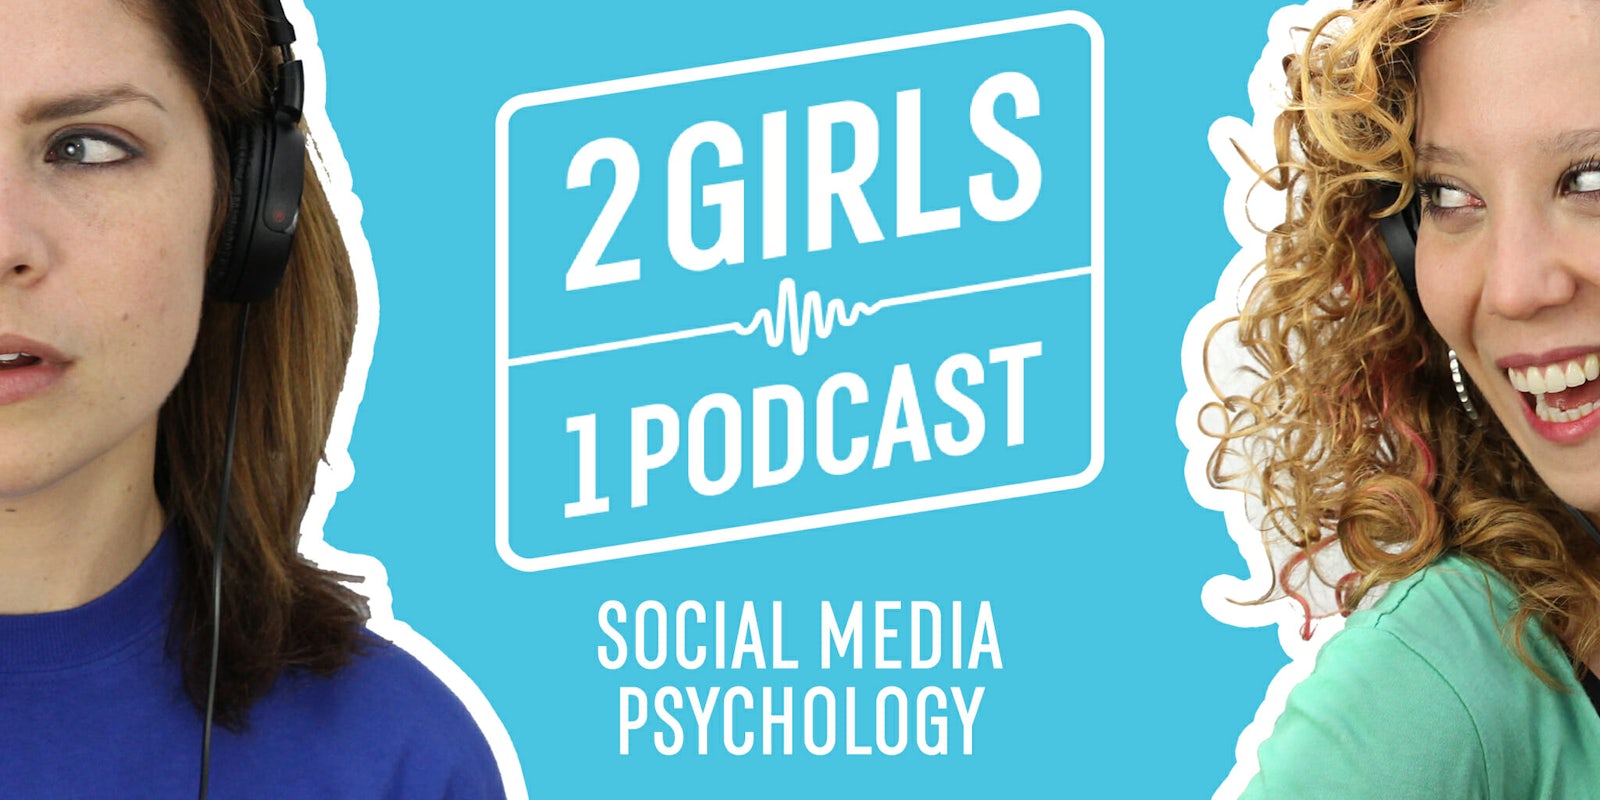 2 Girls 1 Podcast: The Psychological Price We Pay for Social Media